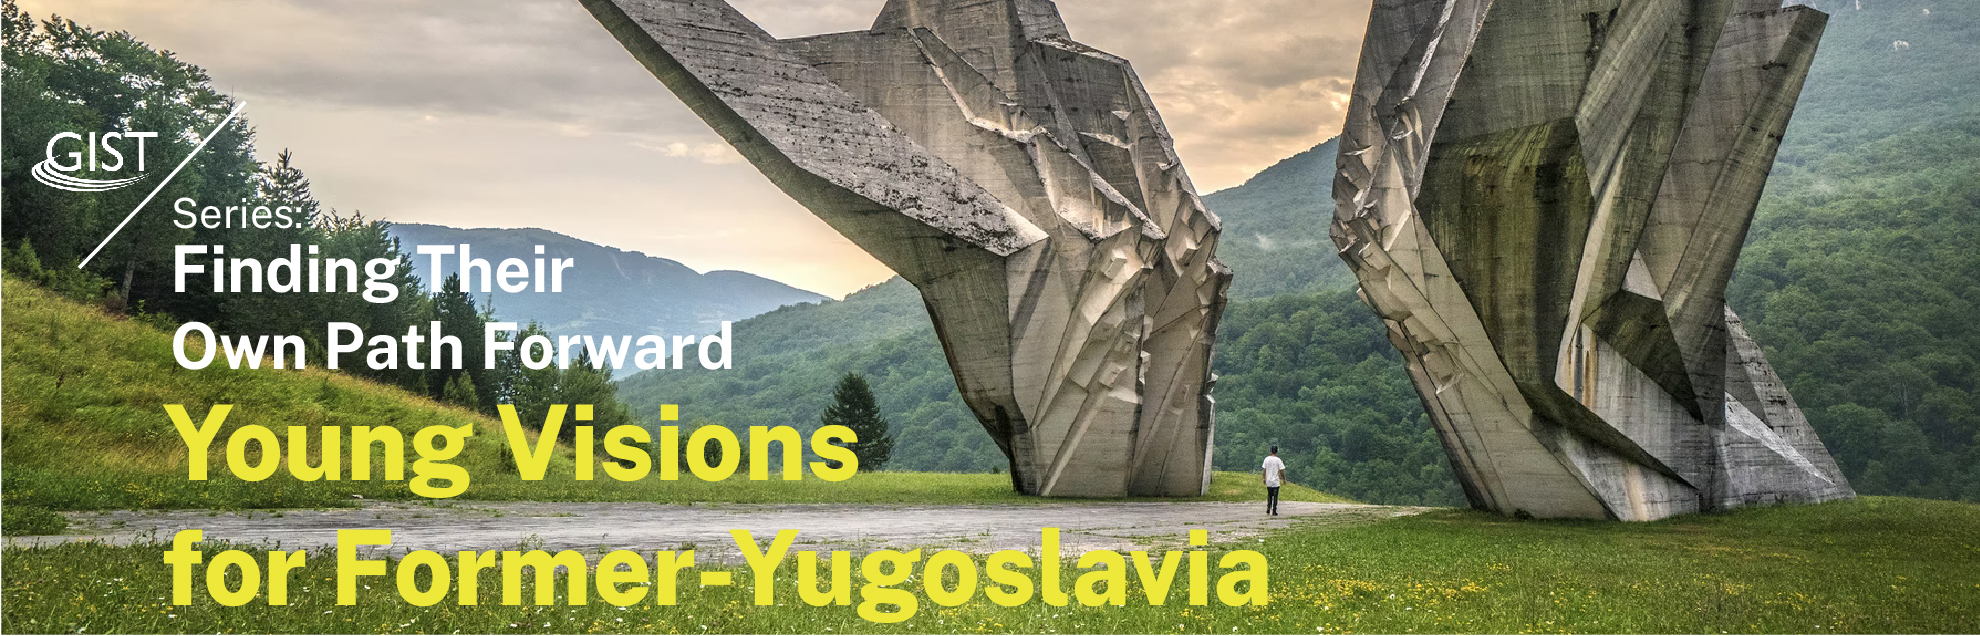 Finding Their Own Path Forward: Young Visions for Former-Yugoslavia